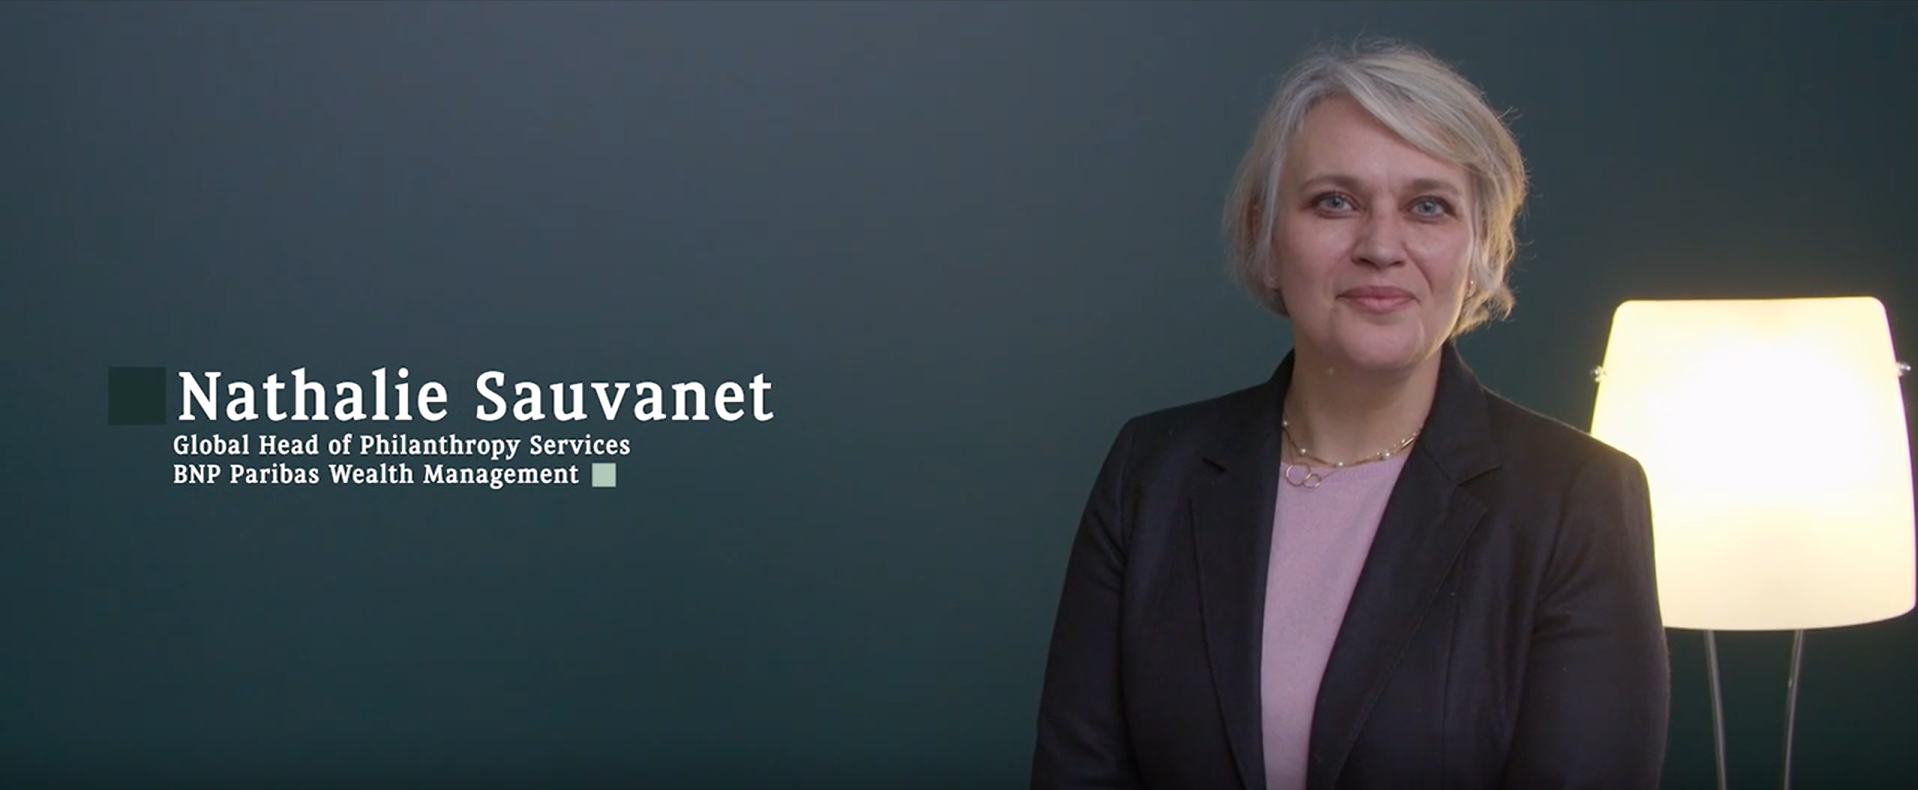 The Wealth Story of Nathalie Sauvanet